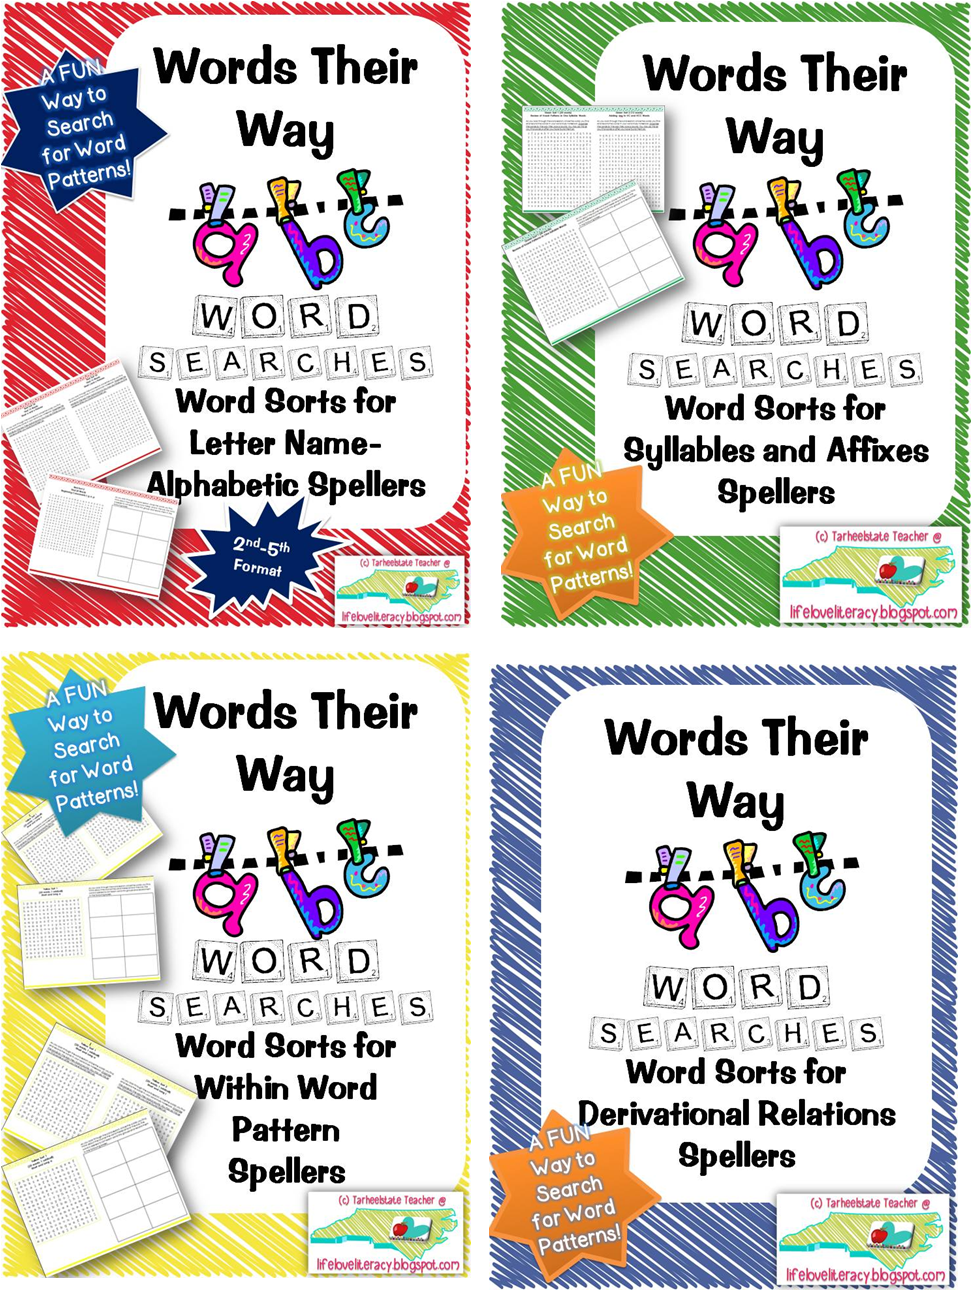 search-results-for-words-their-way-sorts-printable-calendar-2015